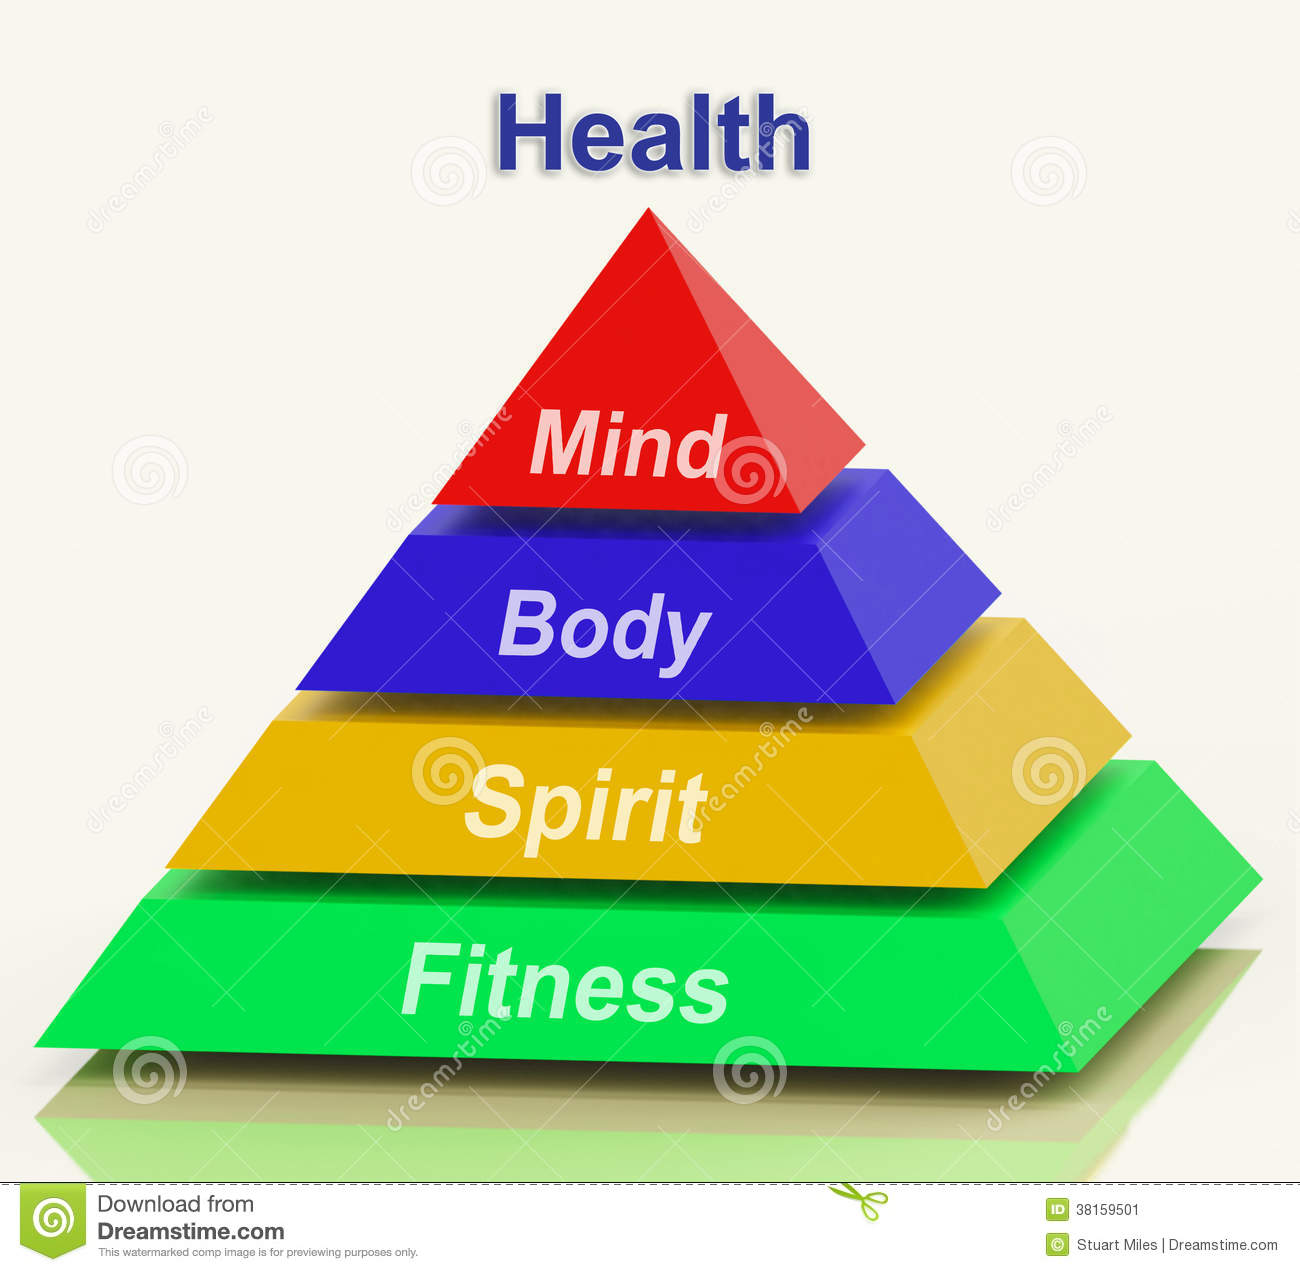 Health Pyramid Means Mind Body Spirit Holistic Wellbeing Stock Image